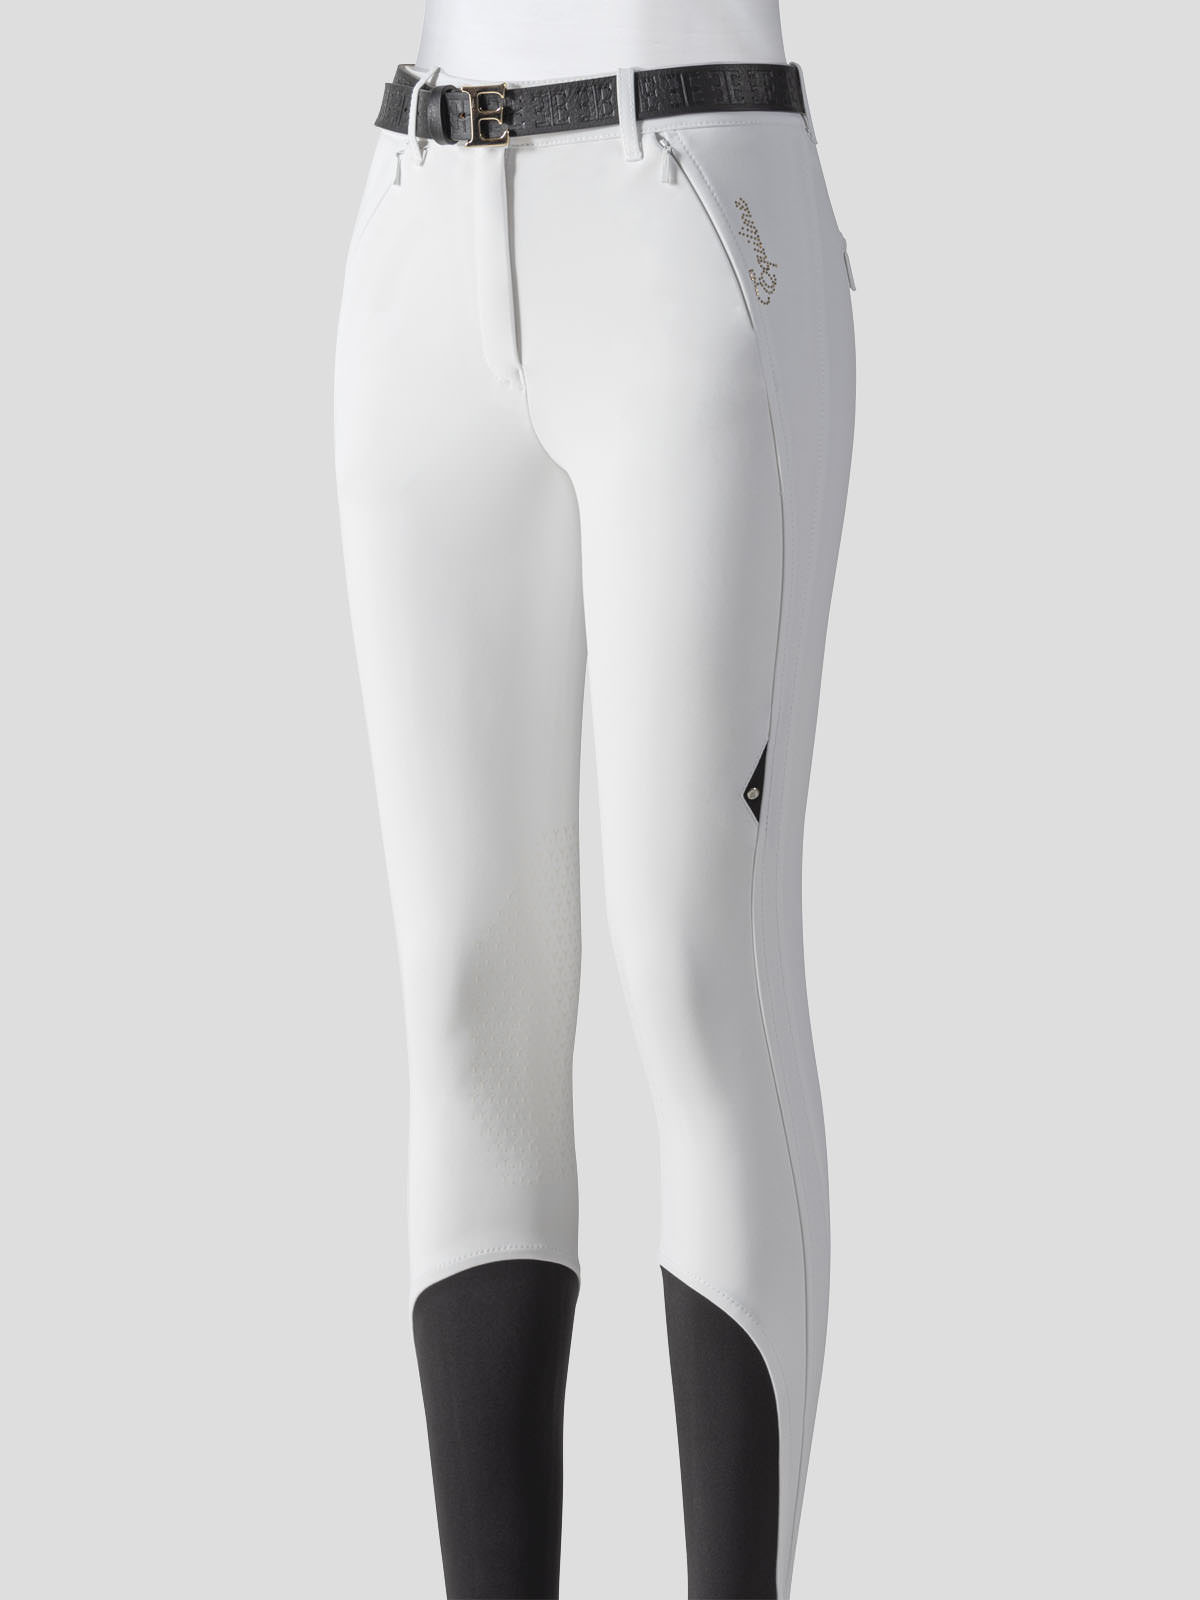 ETTIEKH B-MOVE WOMEN'S HIGH-WAISTED KNEE PATCH BREECHES - White- Front side